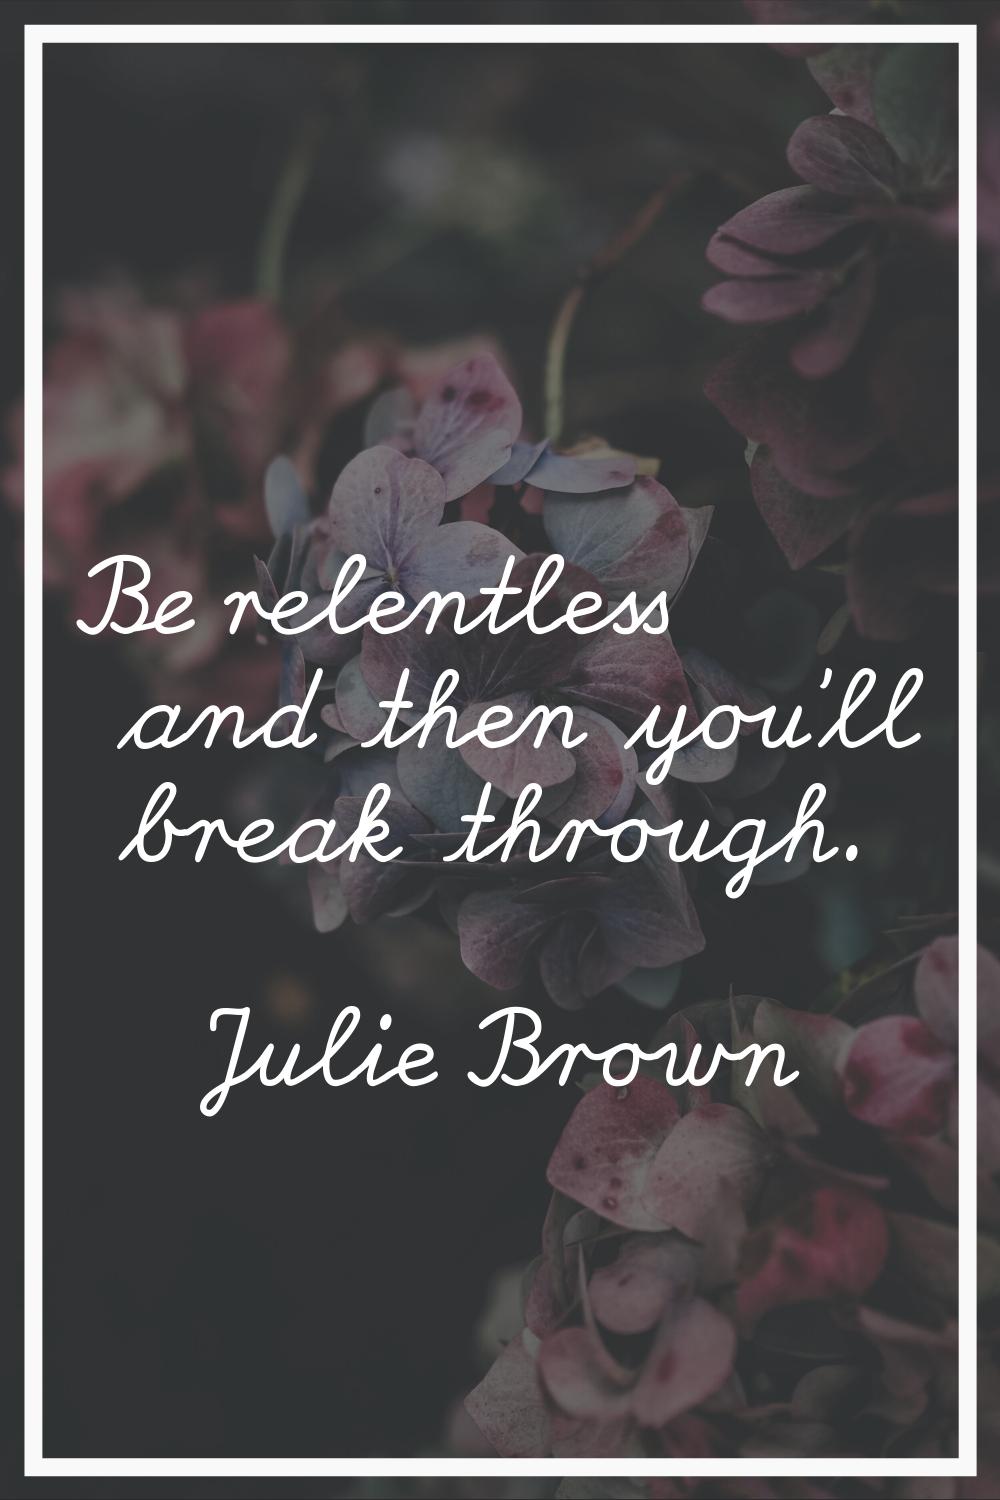 Be relentless and then you'll break through.